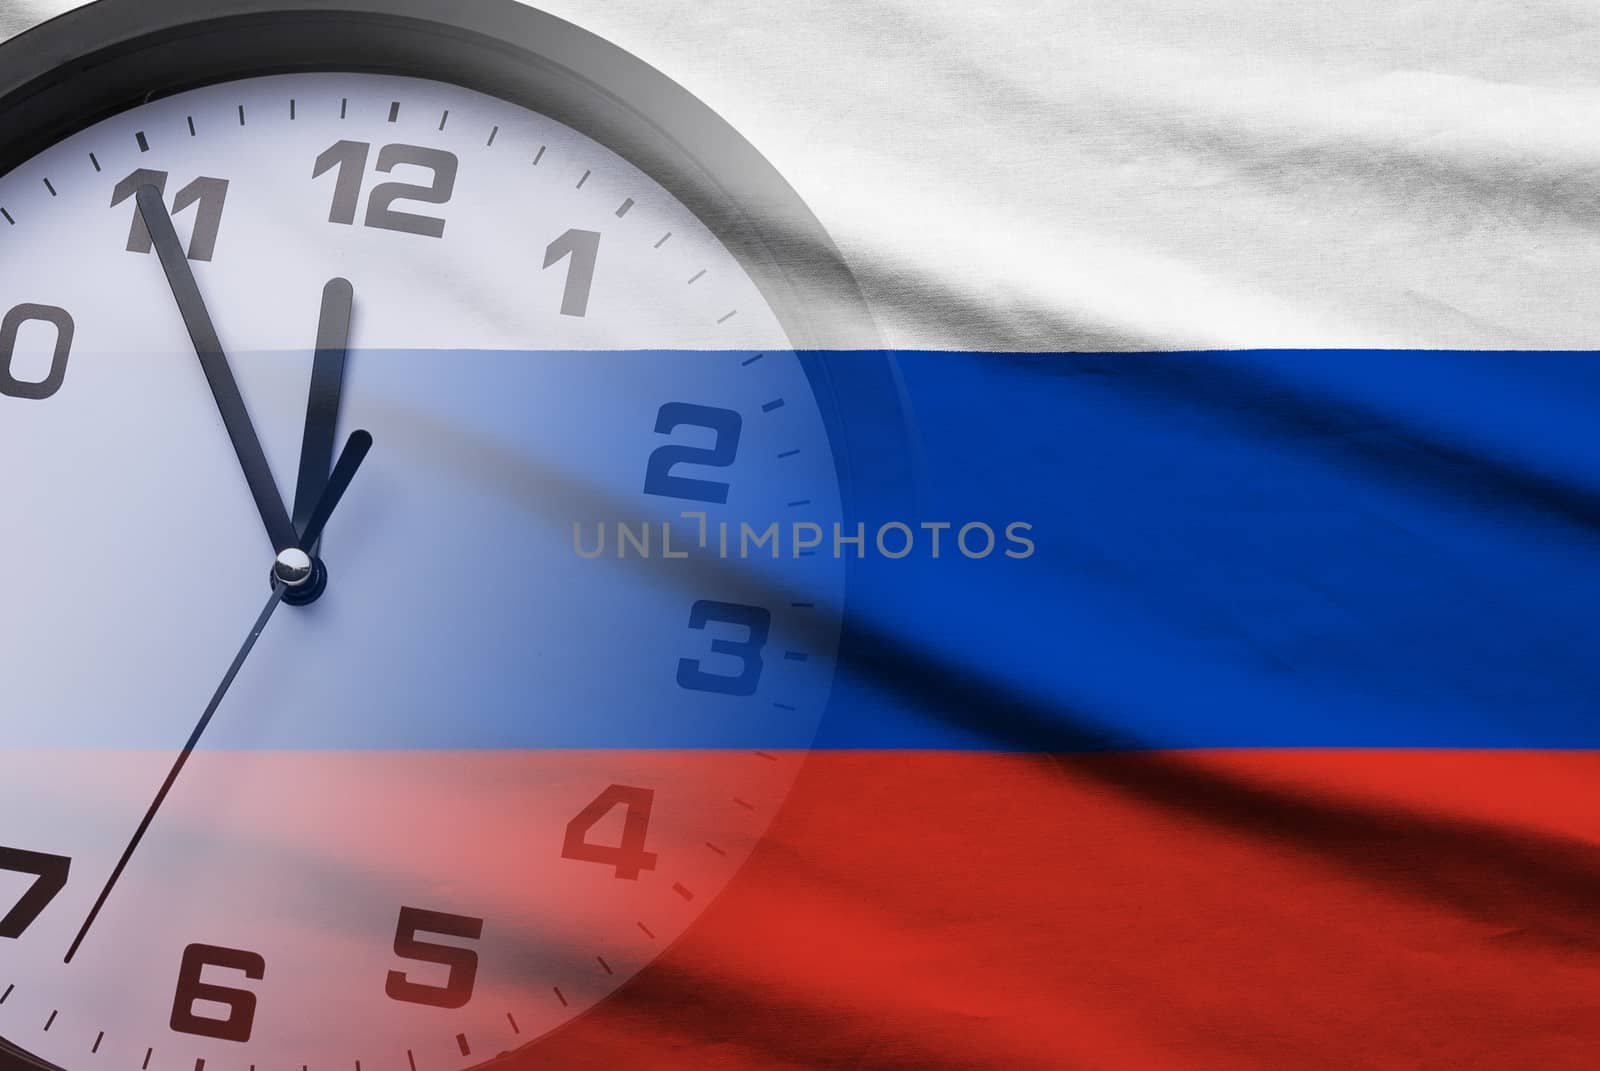 Composite of the Russian flag and a clock face showing a countdown to twelve in a full frame view